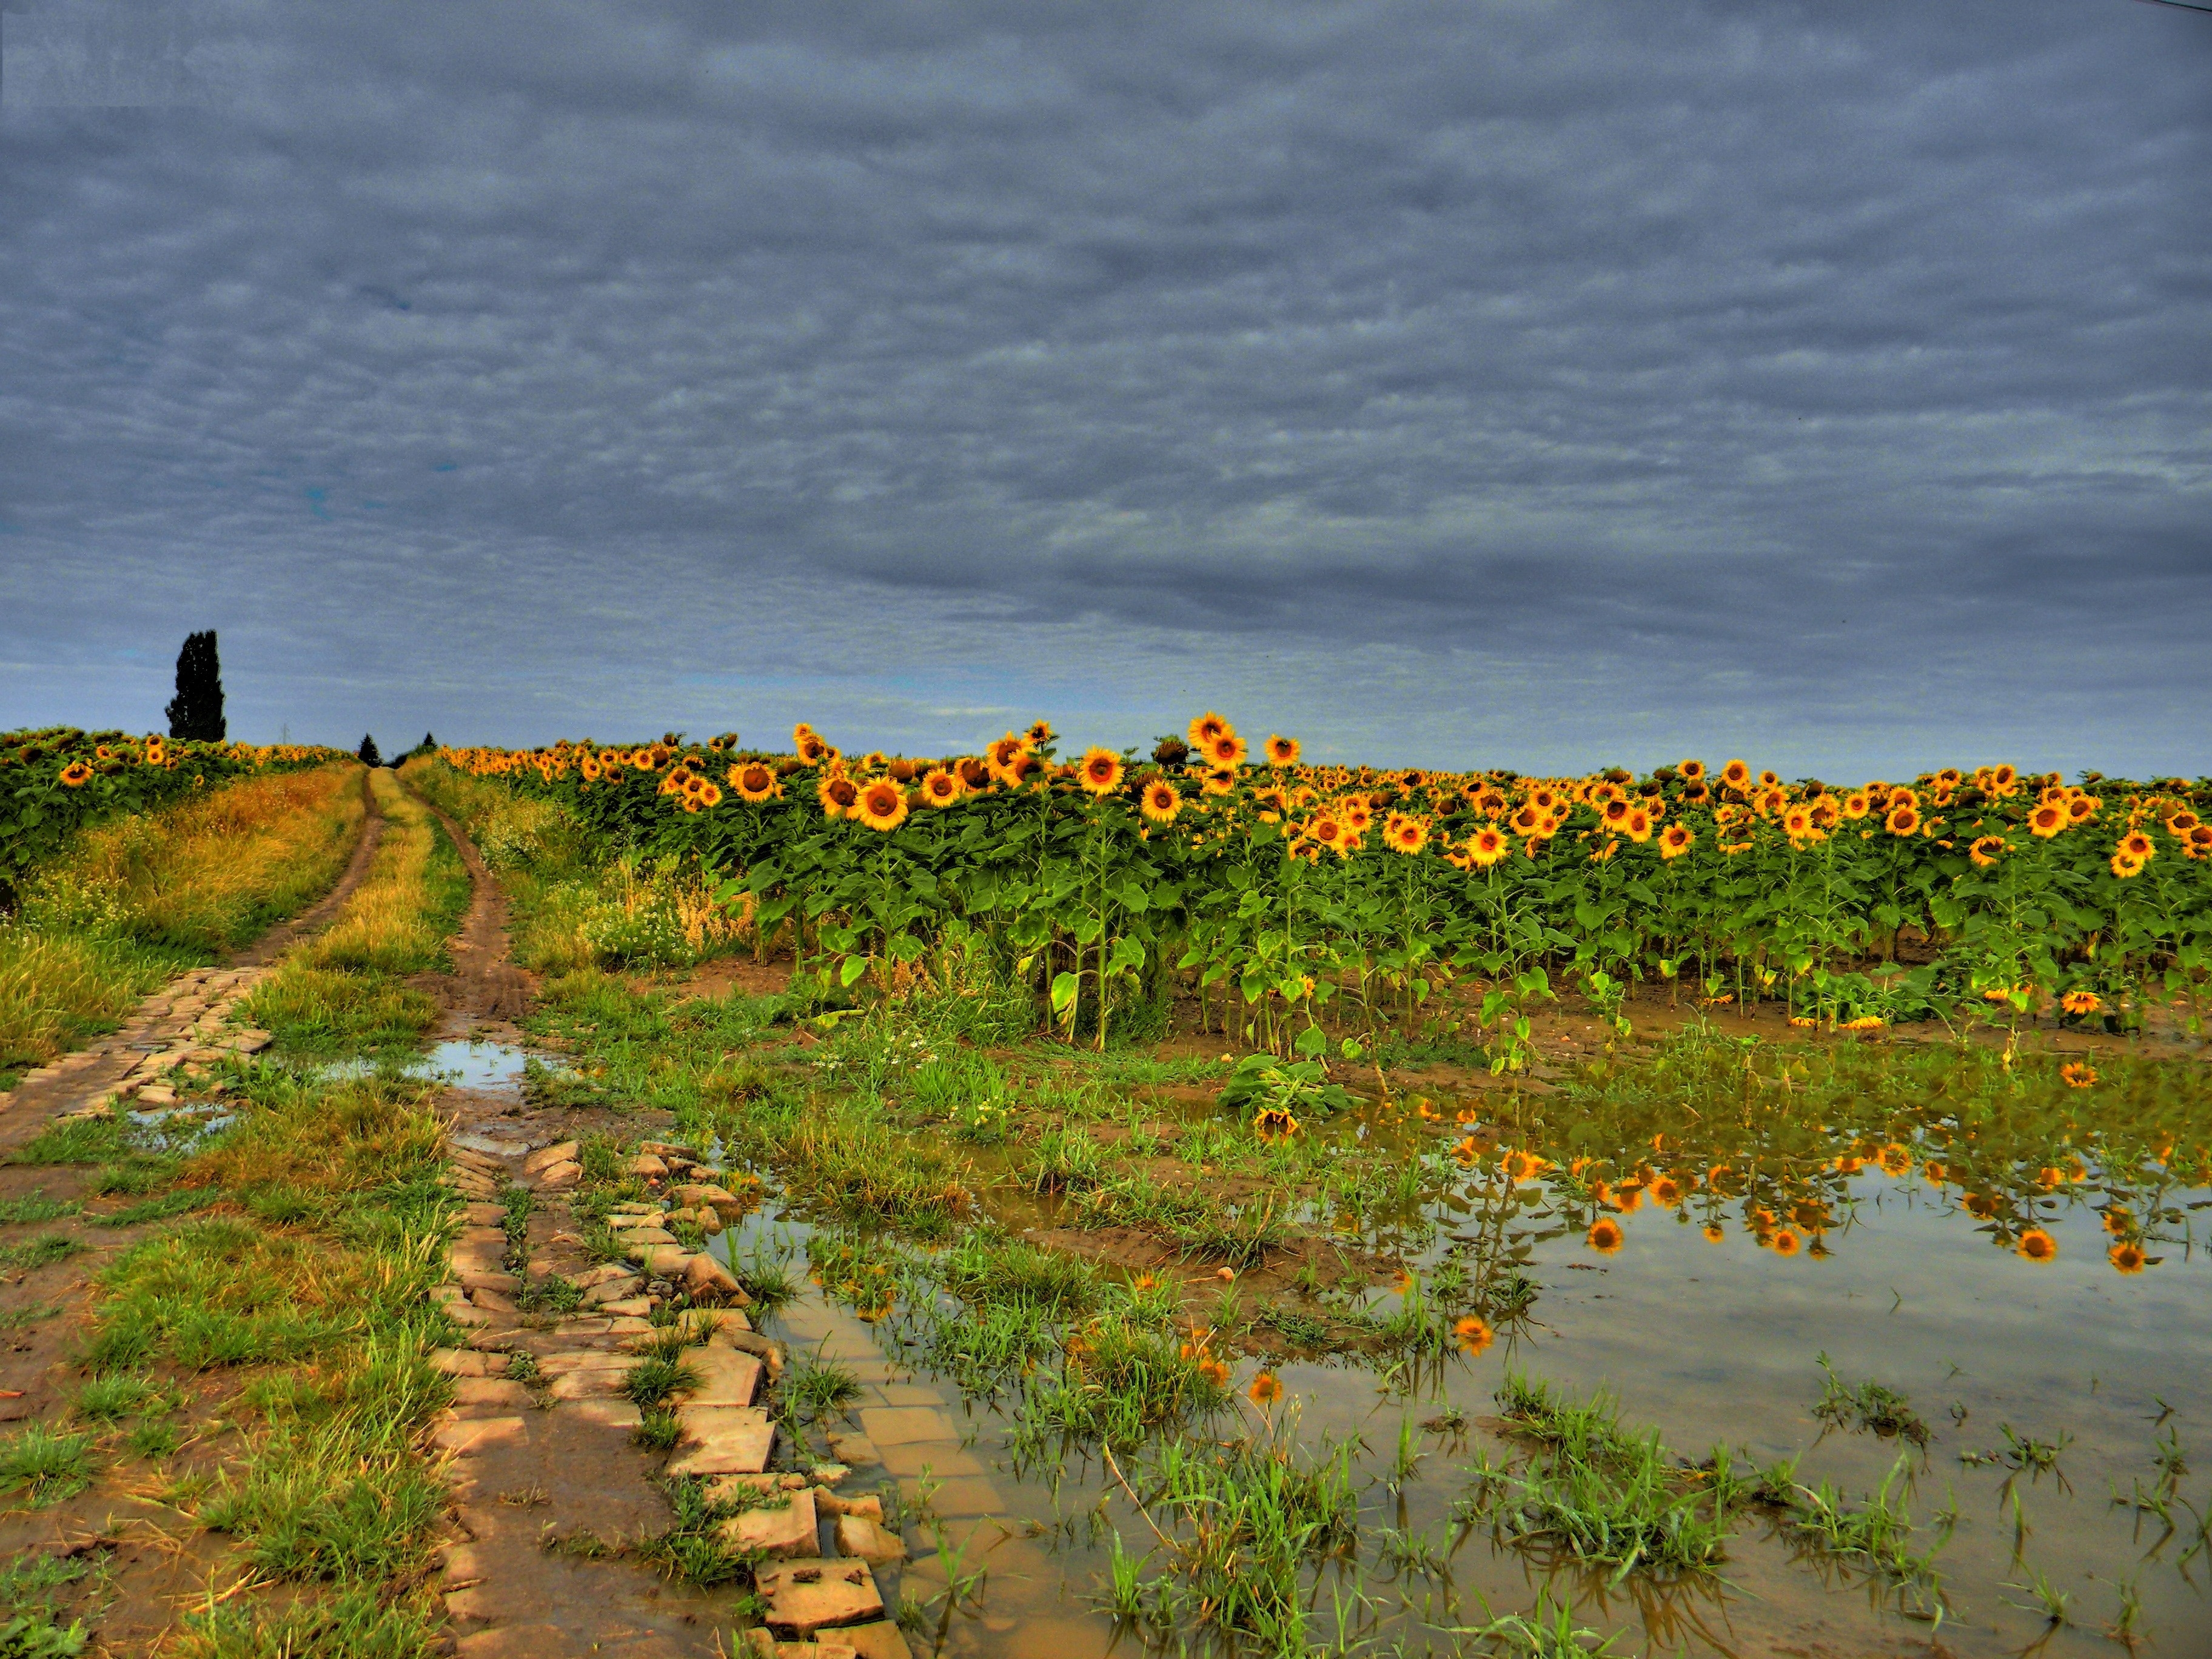 125739 download wallpaper landscape, nature, sunflowers, clouds, road, field screensavers and pictures for free